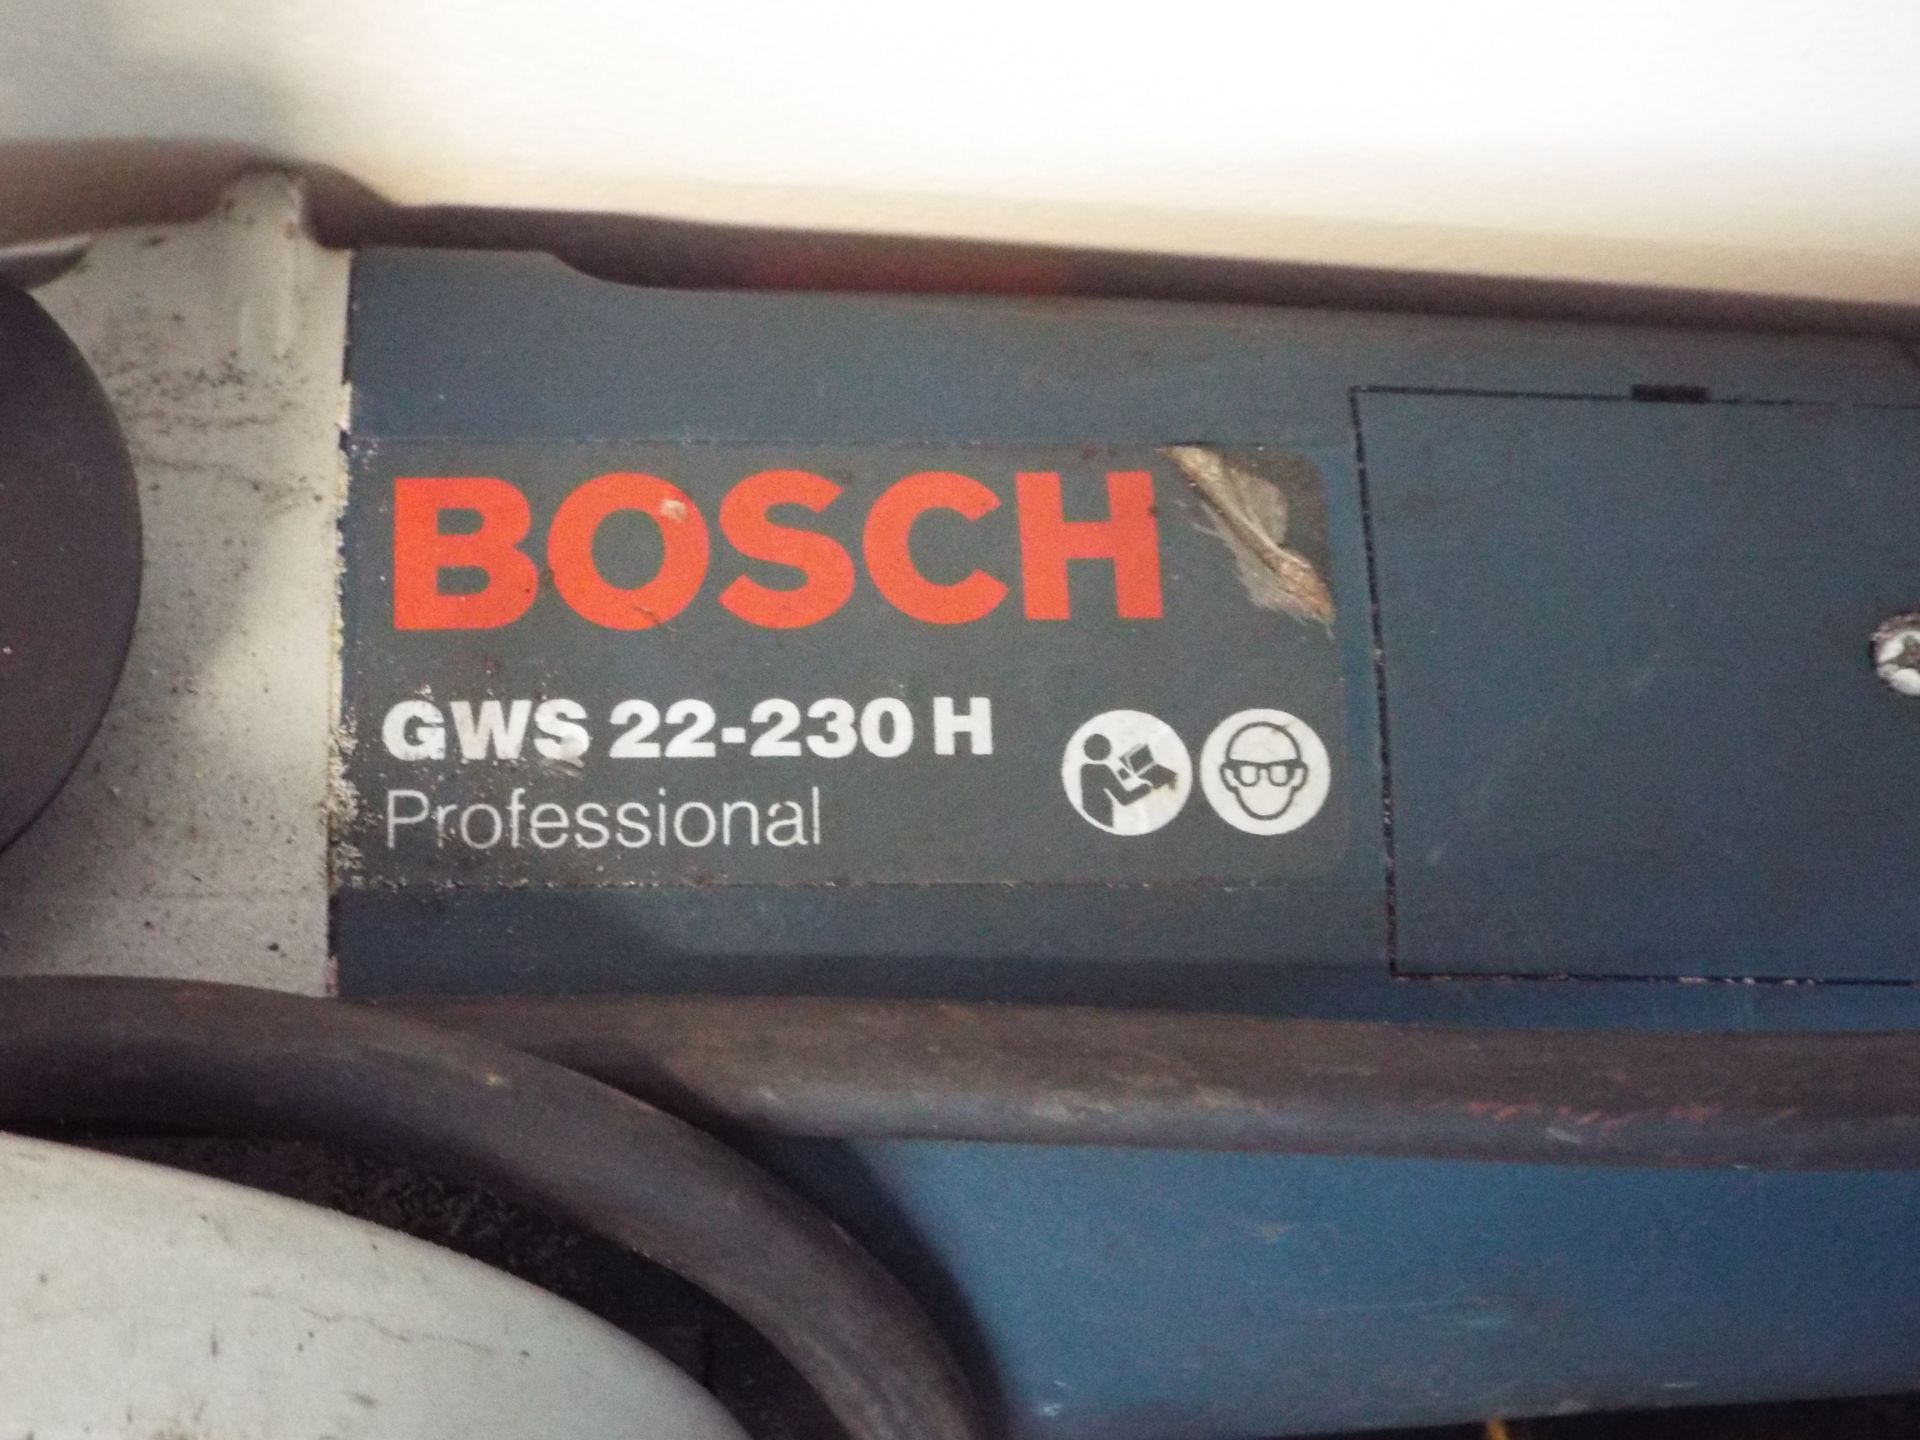 BOSCH GWS 22-230H Professional Angle/Disc Grinder HITACHI G18SE3 - Ditto METABO W1080 - Ditto